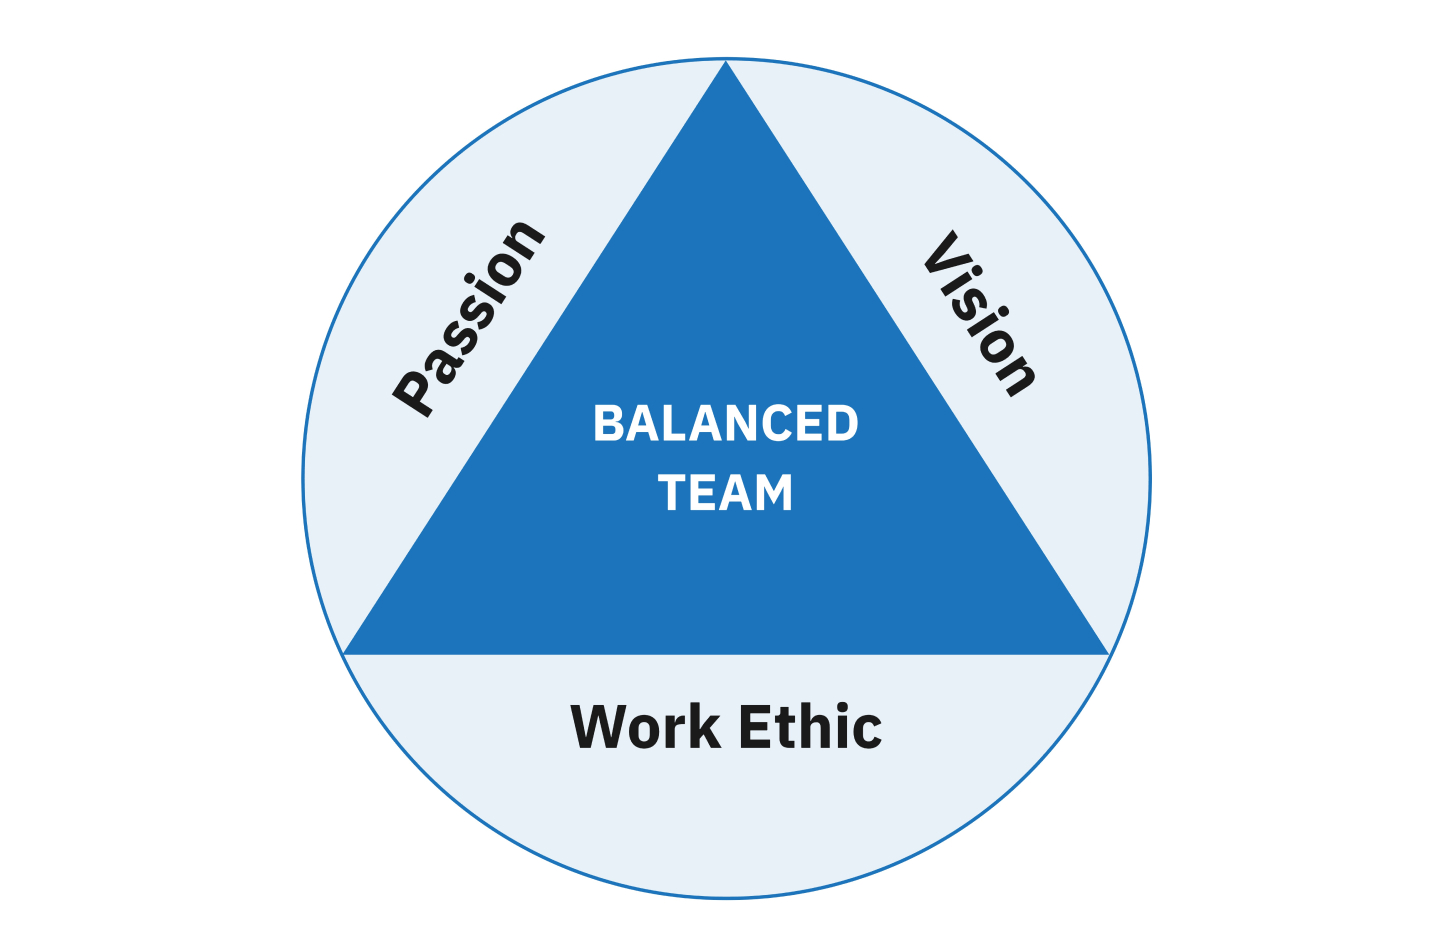 A shared passion, vision, and work ethic is essential to build and maintain optimal team performance